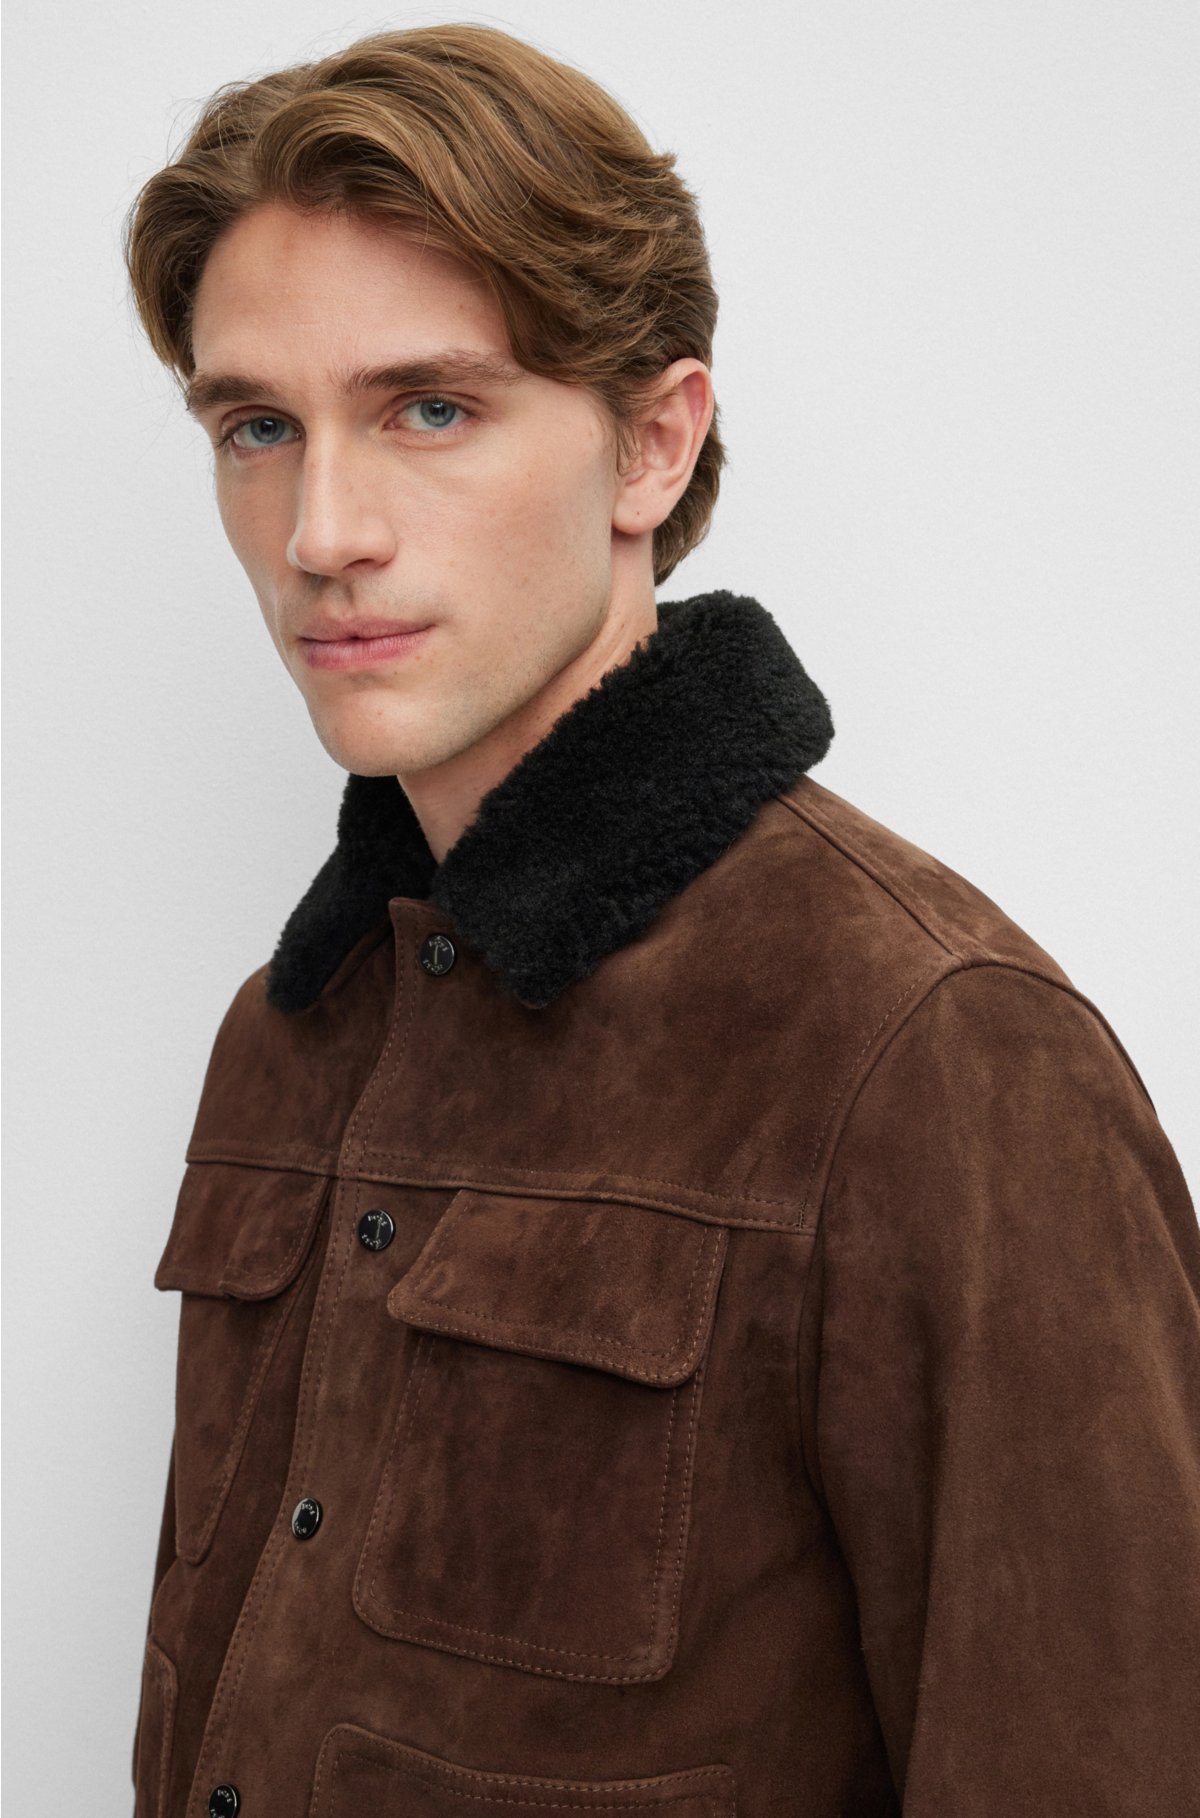 Mixed Material Leather Teddy Blouson - Men - Ready-to-Wear